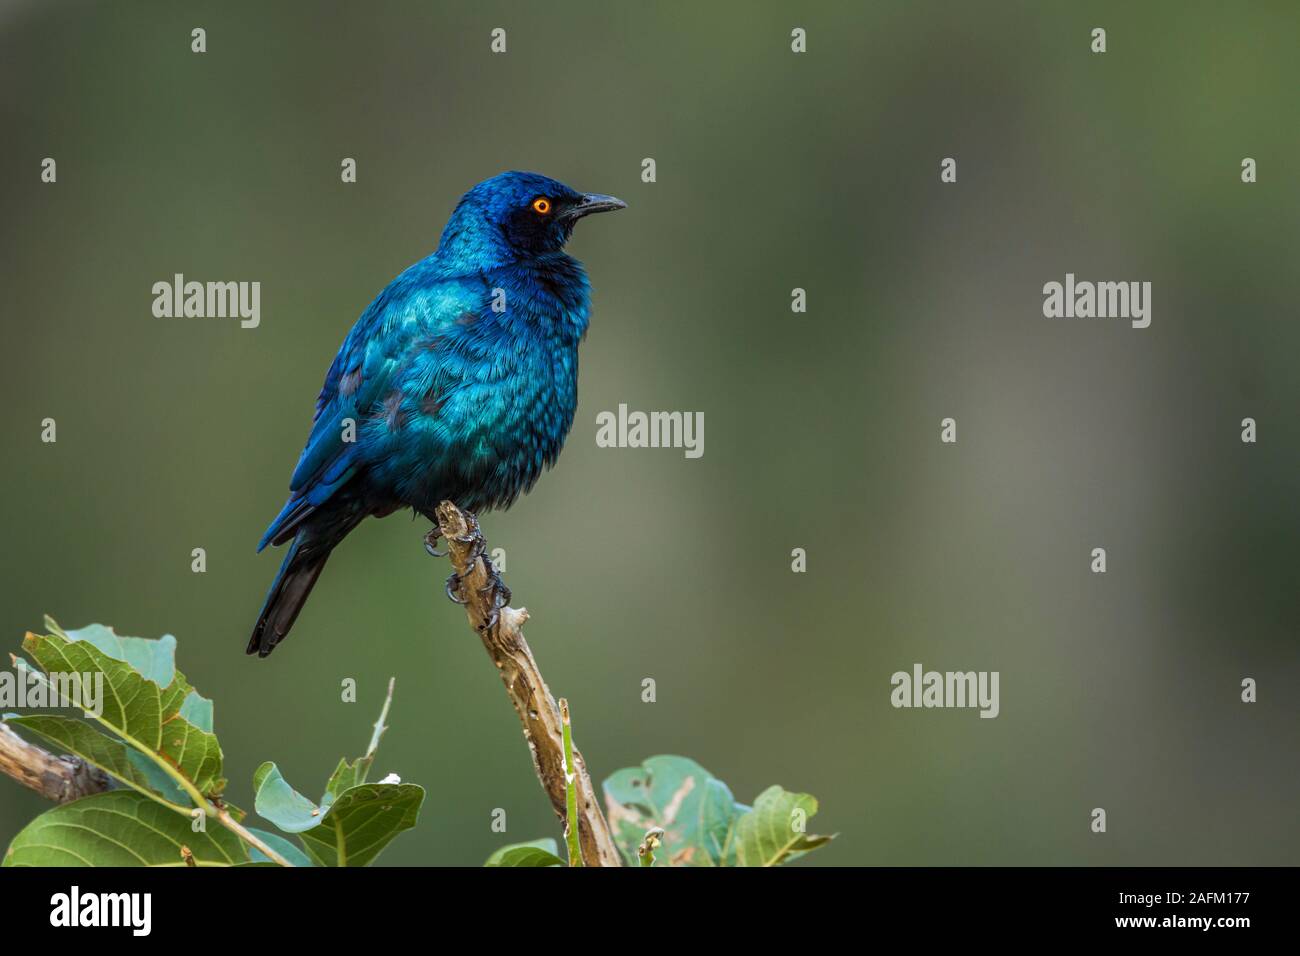 Greater Blue-eared Glossy Starling grooming isolated in natural background in Kruger National park, South Africa ; Specie Lamprotornis chalybaeus fami Stock Photo